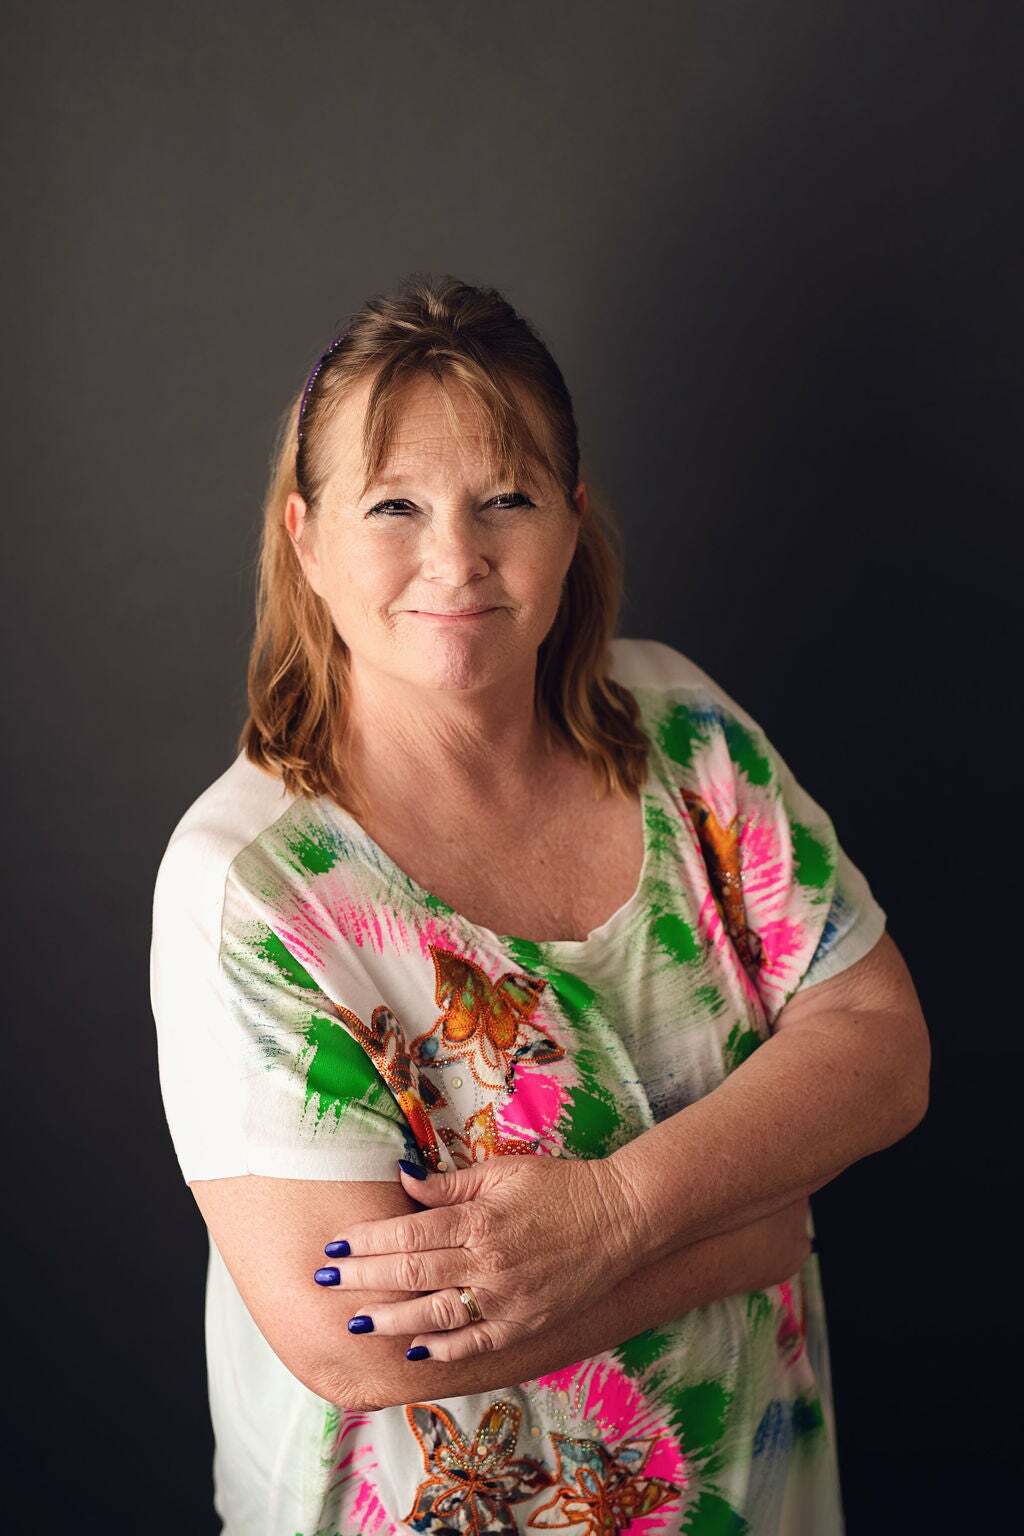 Beth Dahlstrom, Real Estate Broker in Cape Coral, ERA Real Solutions Realty